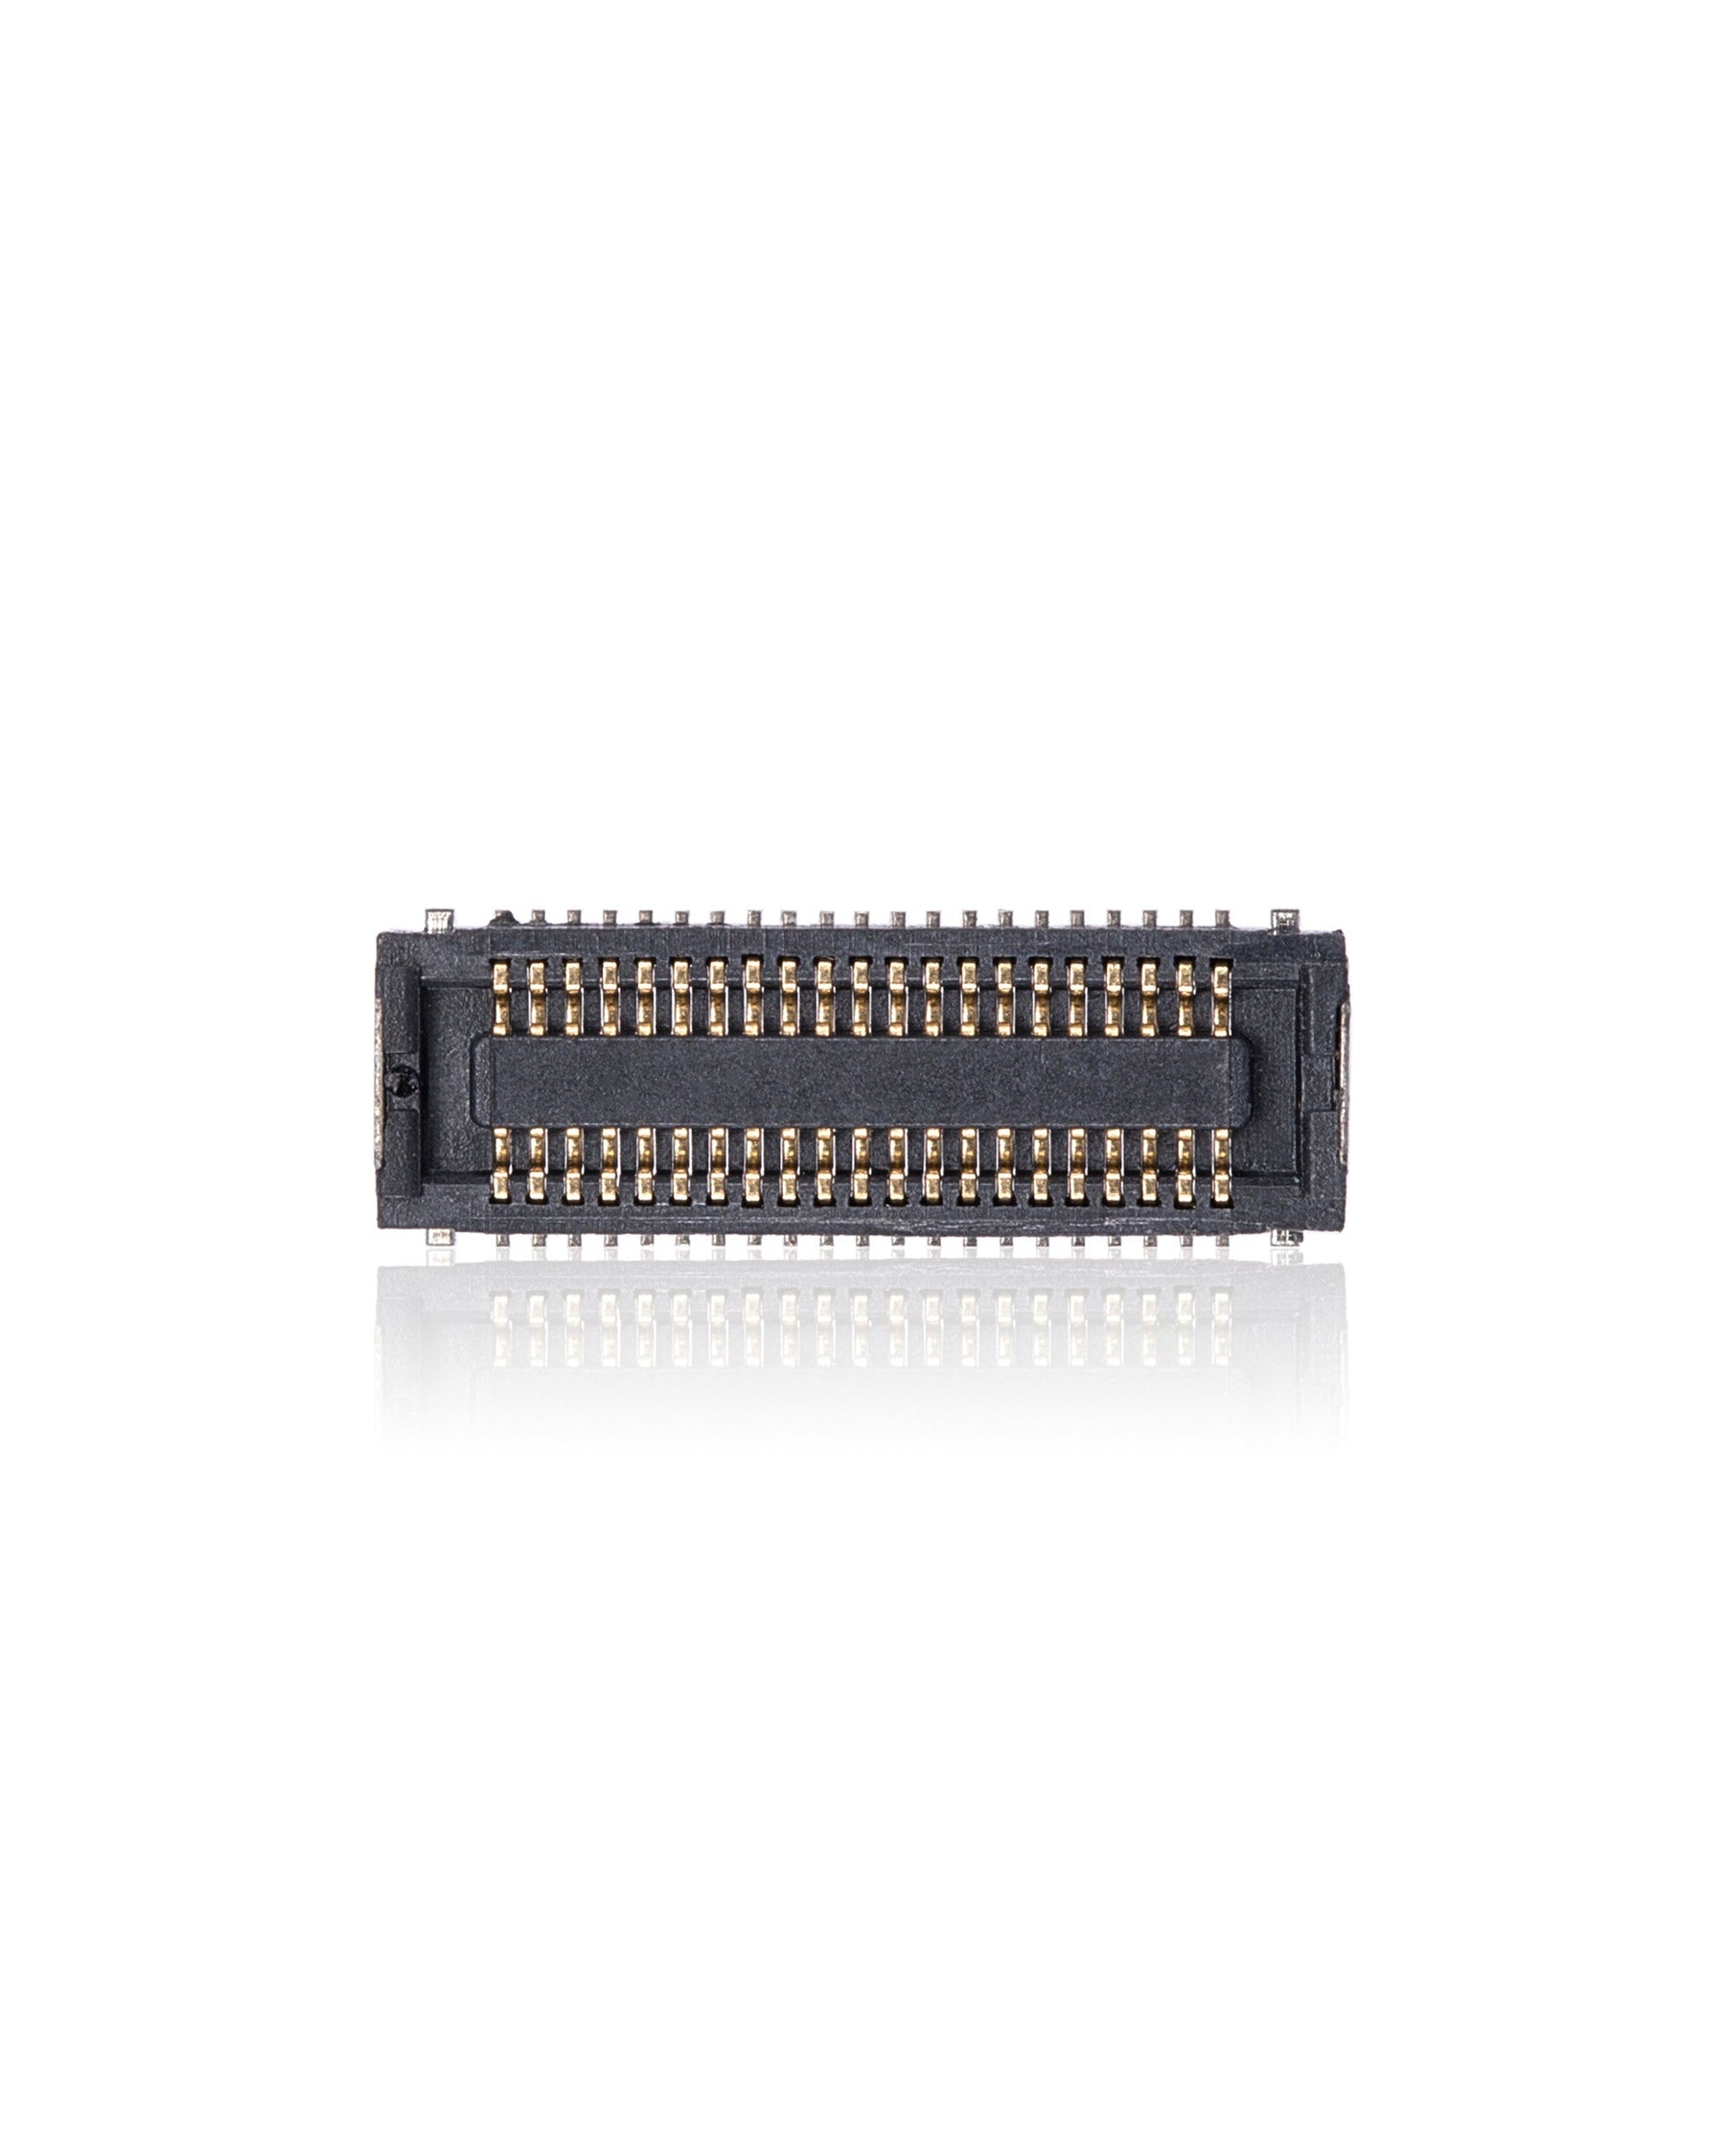 LCD (ON THE MOTHERBOARD) FPC CONNECTOR (42 PIN) FOR IPAD 6